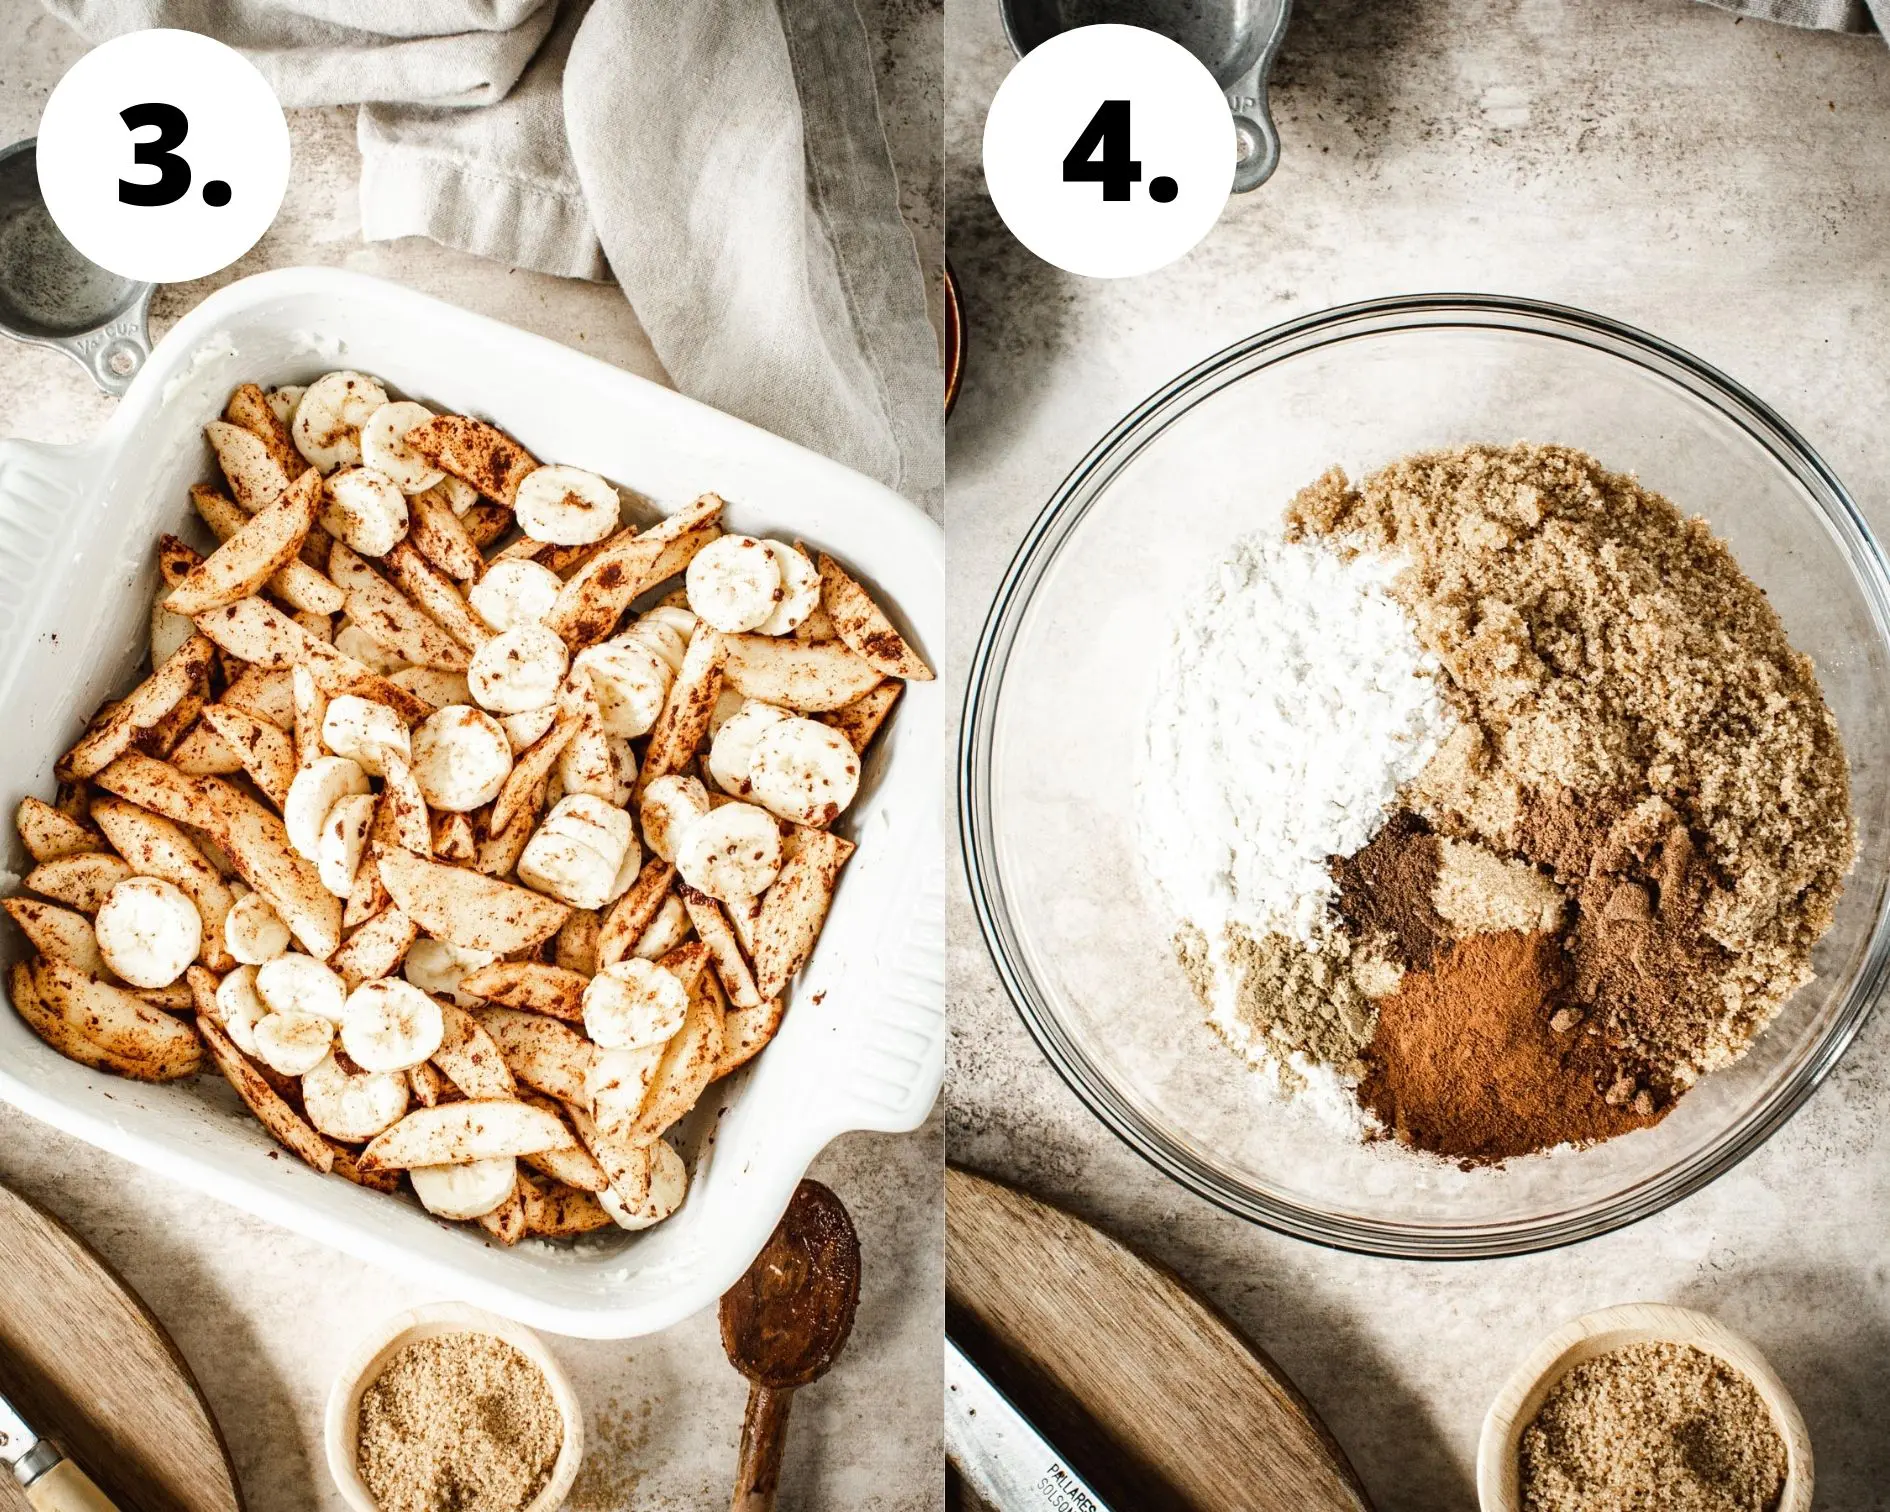 Baked apple crumble process steps 3 and 4.